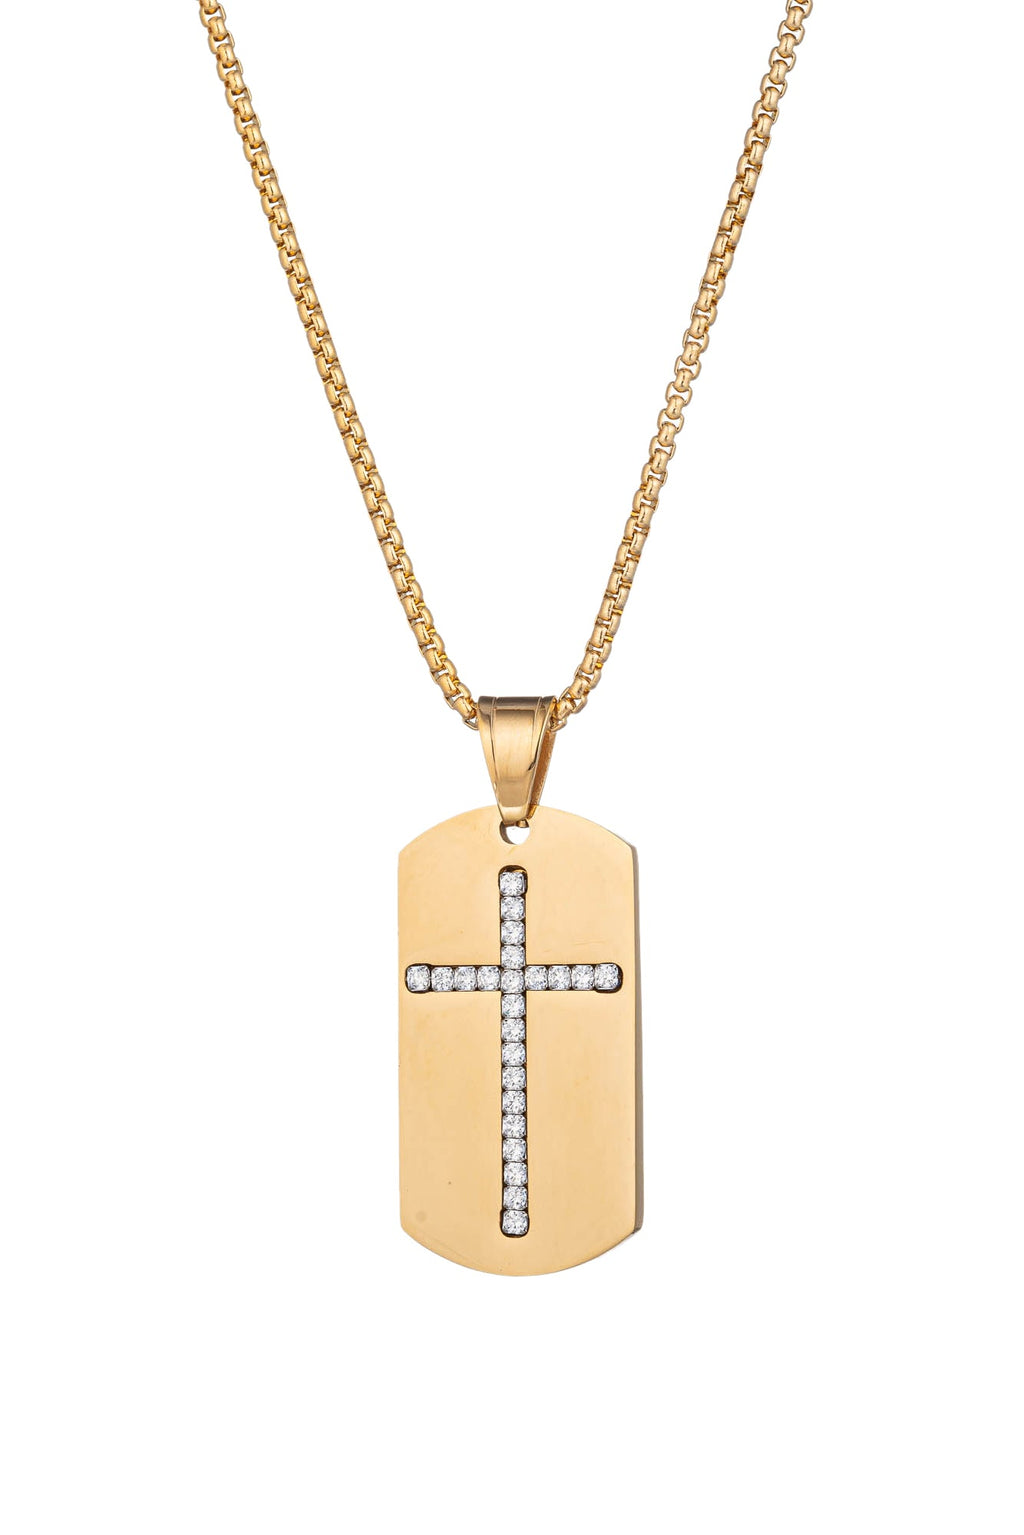 Samuel Dog Tag Cross Pendant Necklace: A Stylish Blend of Strength and Faith in One Striking Accessory.